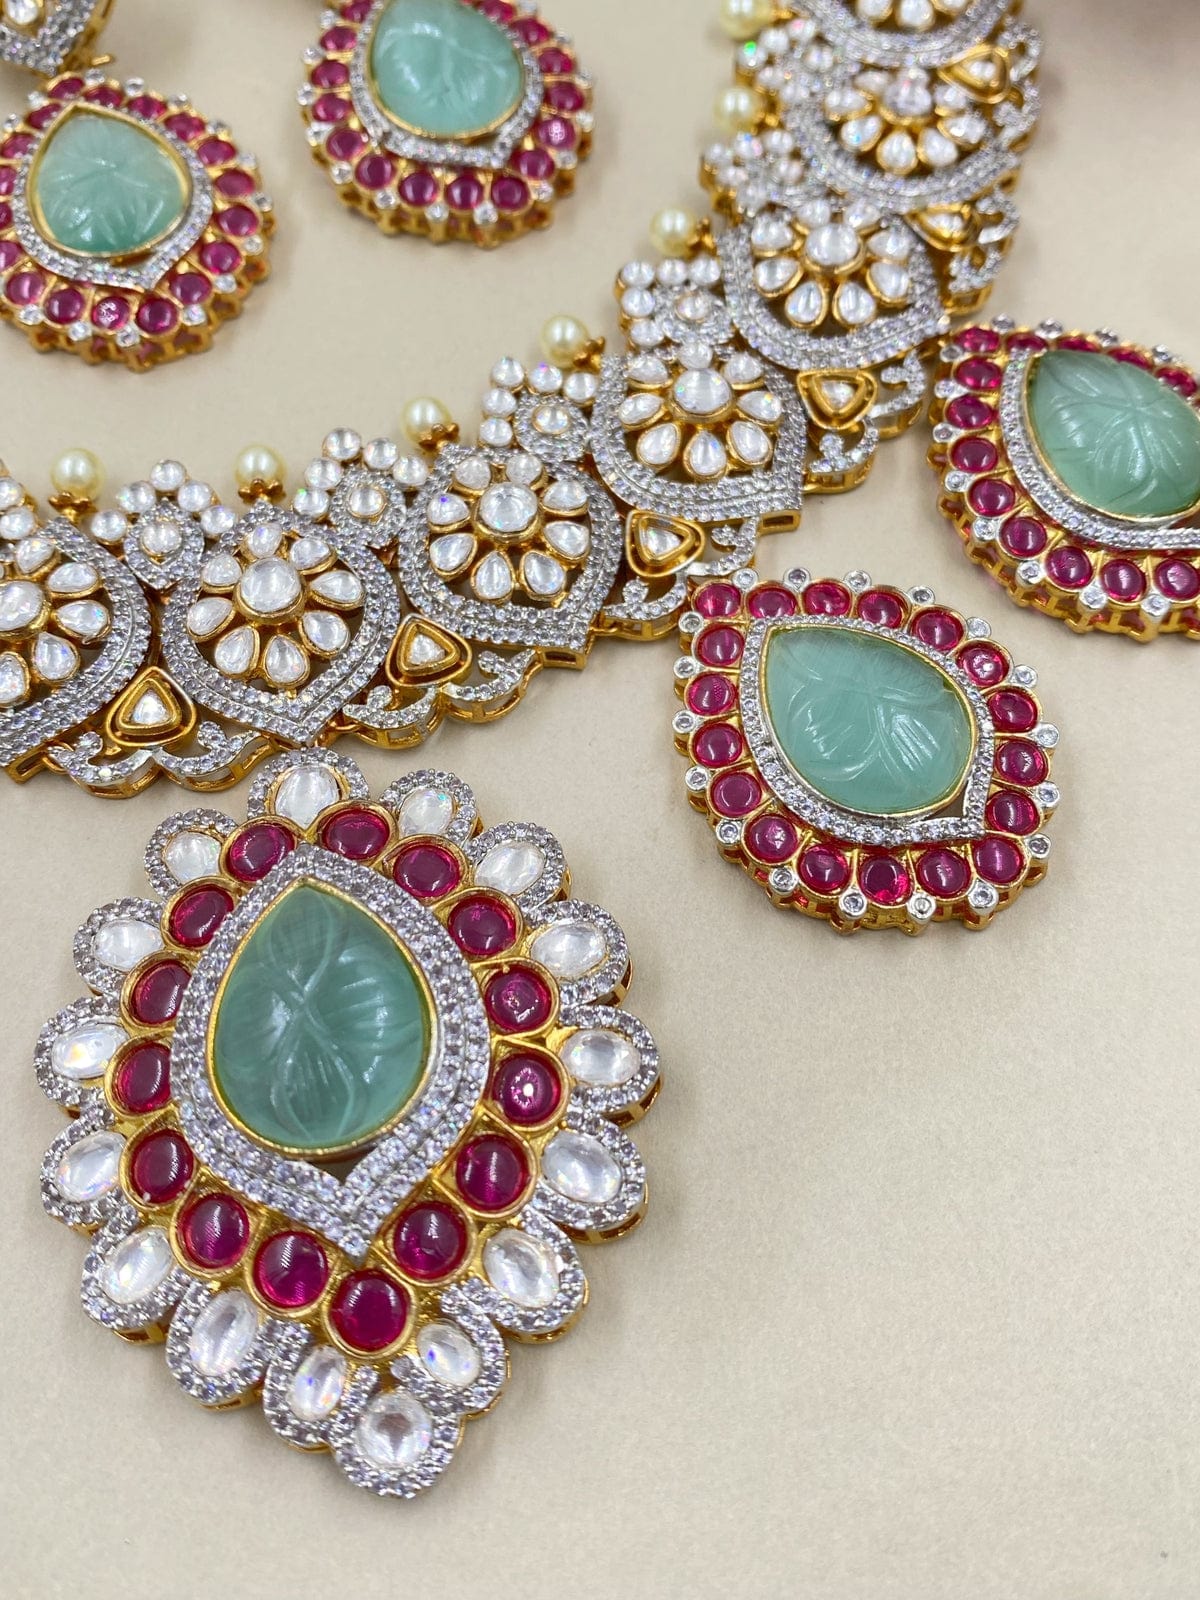 Designer Heavy Quality Polki And Ruby Stones Bridal Necklace By Gehna Shop Victorian Necklace Sets